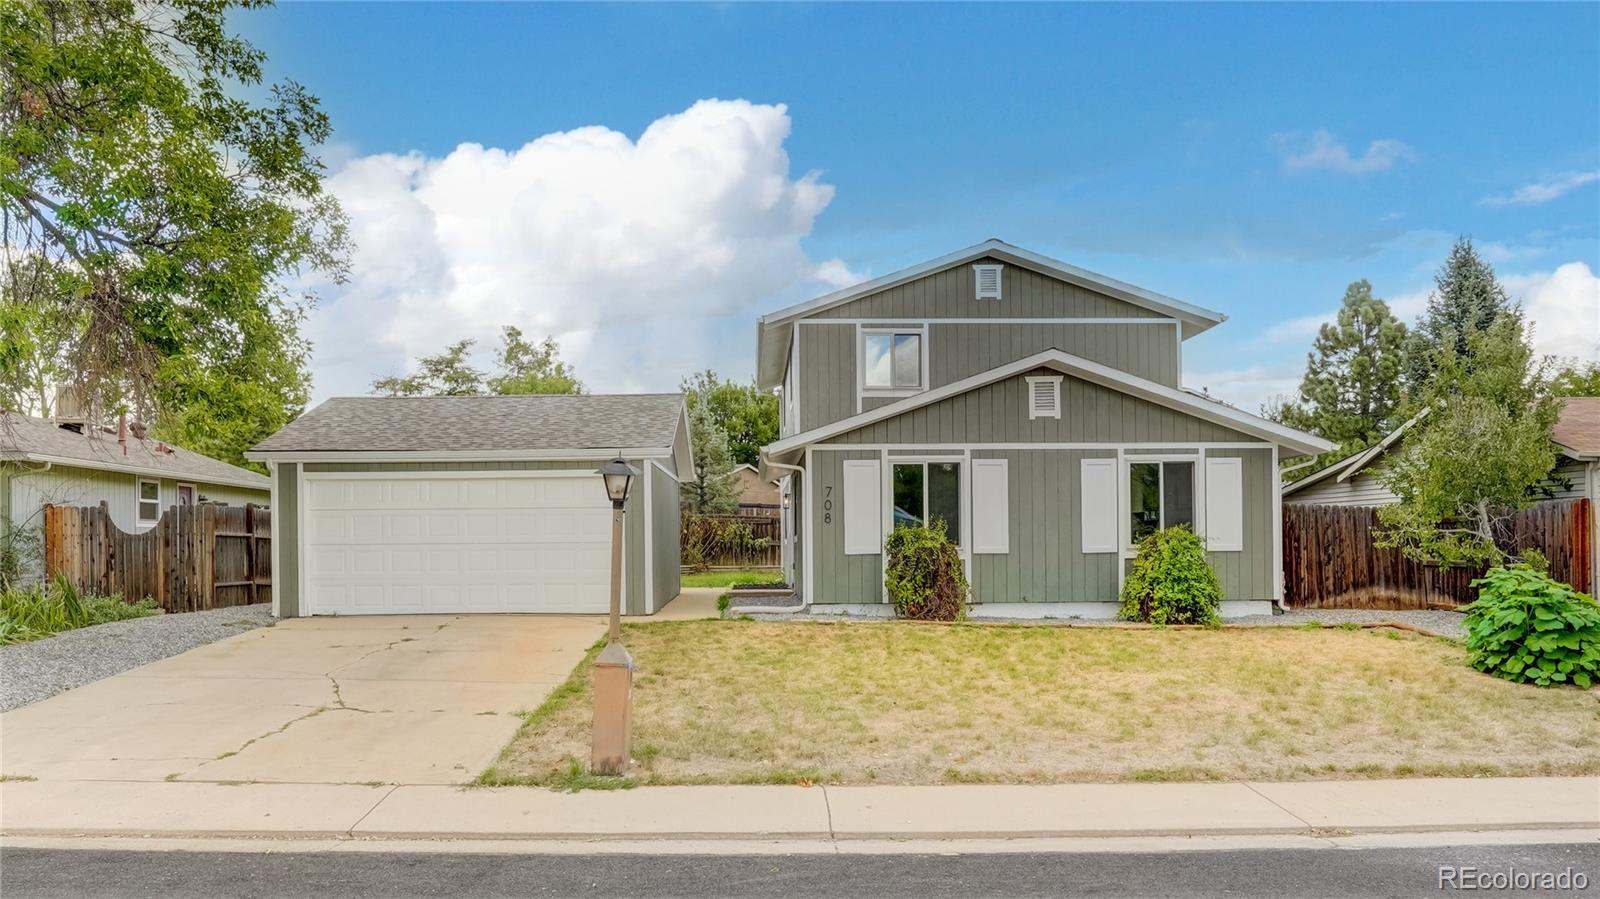 708  Independence Drive, longmont MLS: 4625977 Beds: 4 Baths: 2 Price: $545,000